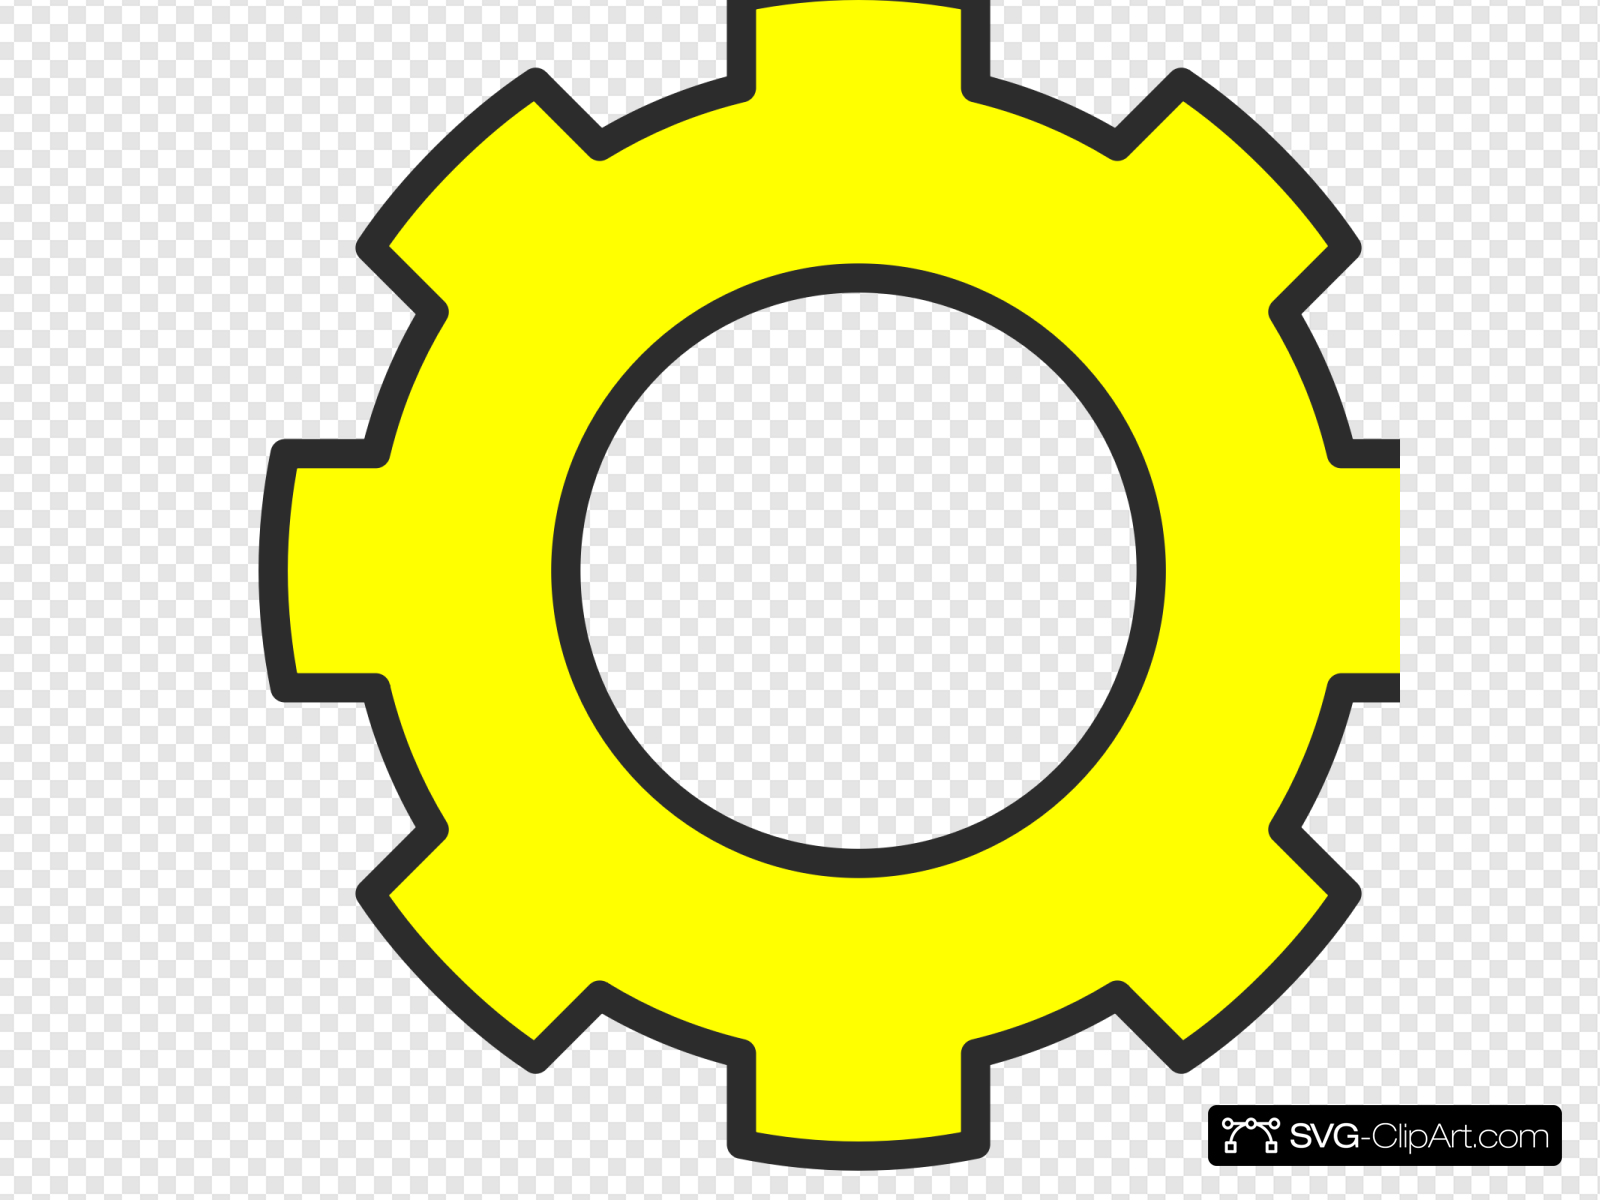 Imagination Movers Gears Clip art, Icon and SVG